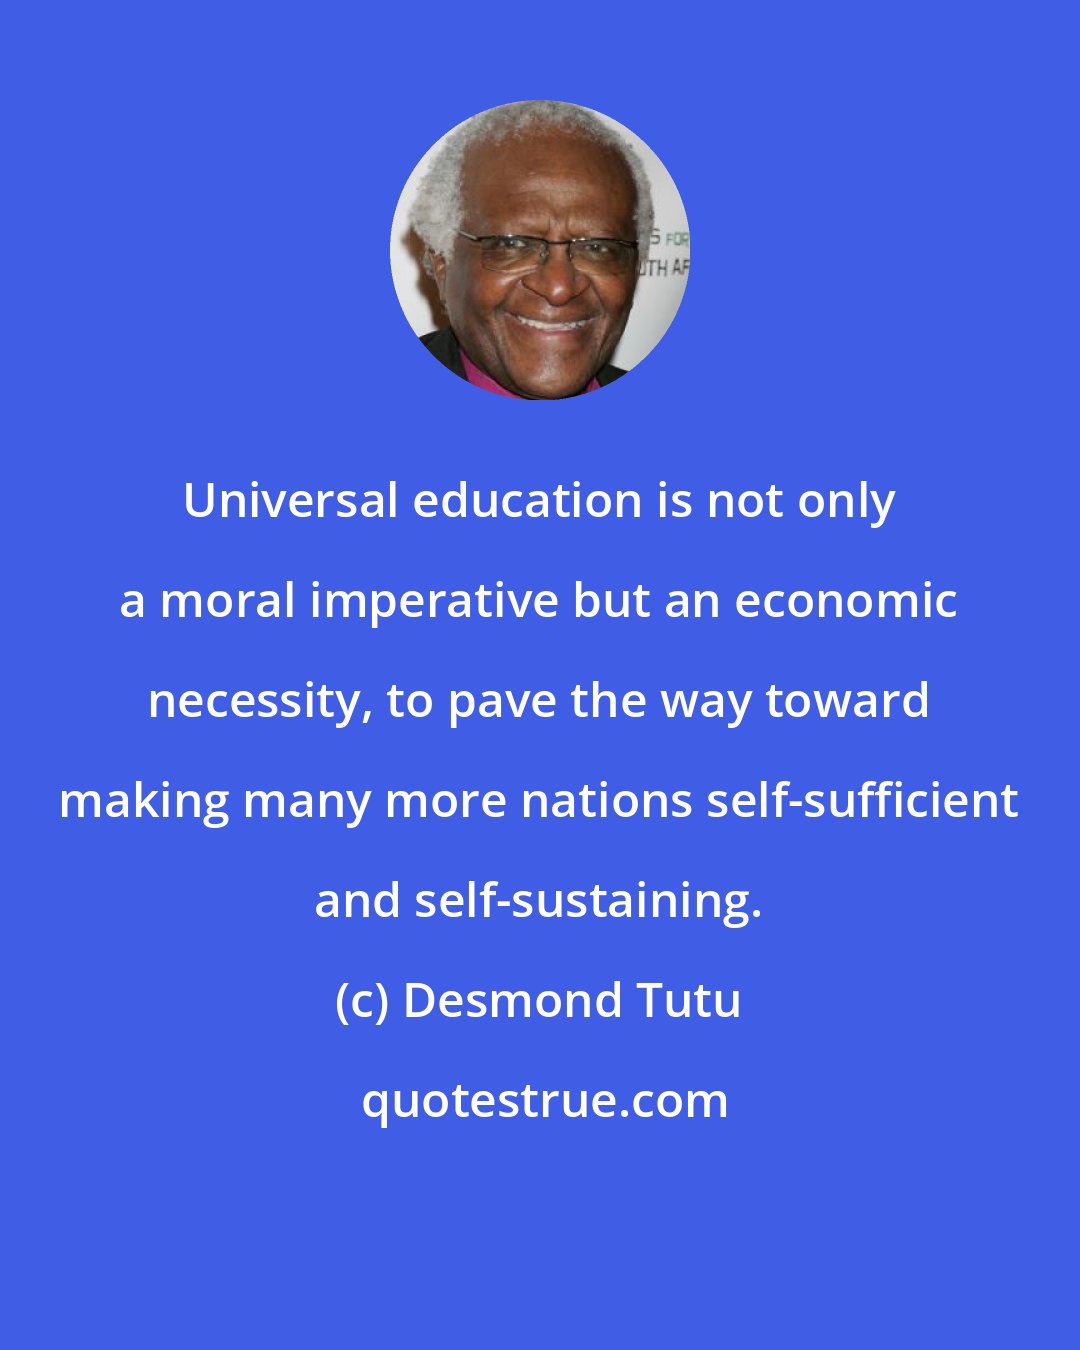 Desmond Tutu: Universal education is not only a moral imperative but an economic necessity, to pave the way toward making many more nations self-sufficient and self-sustaining.